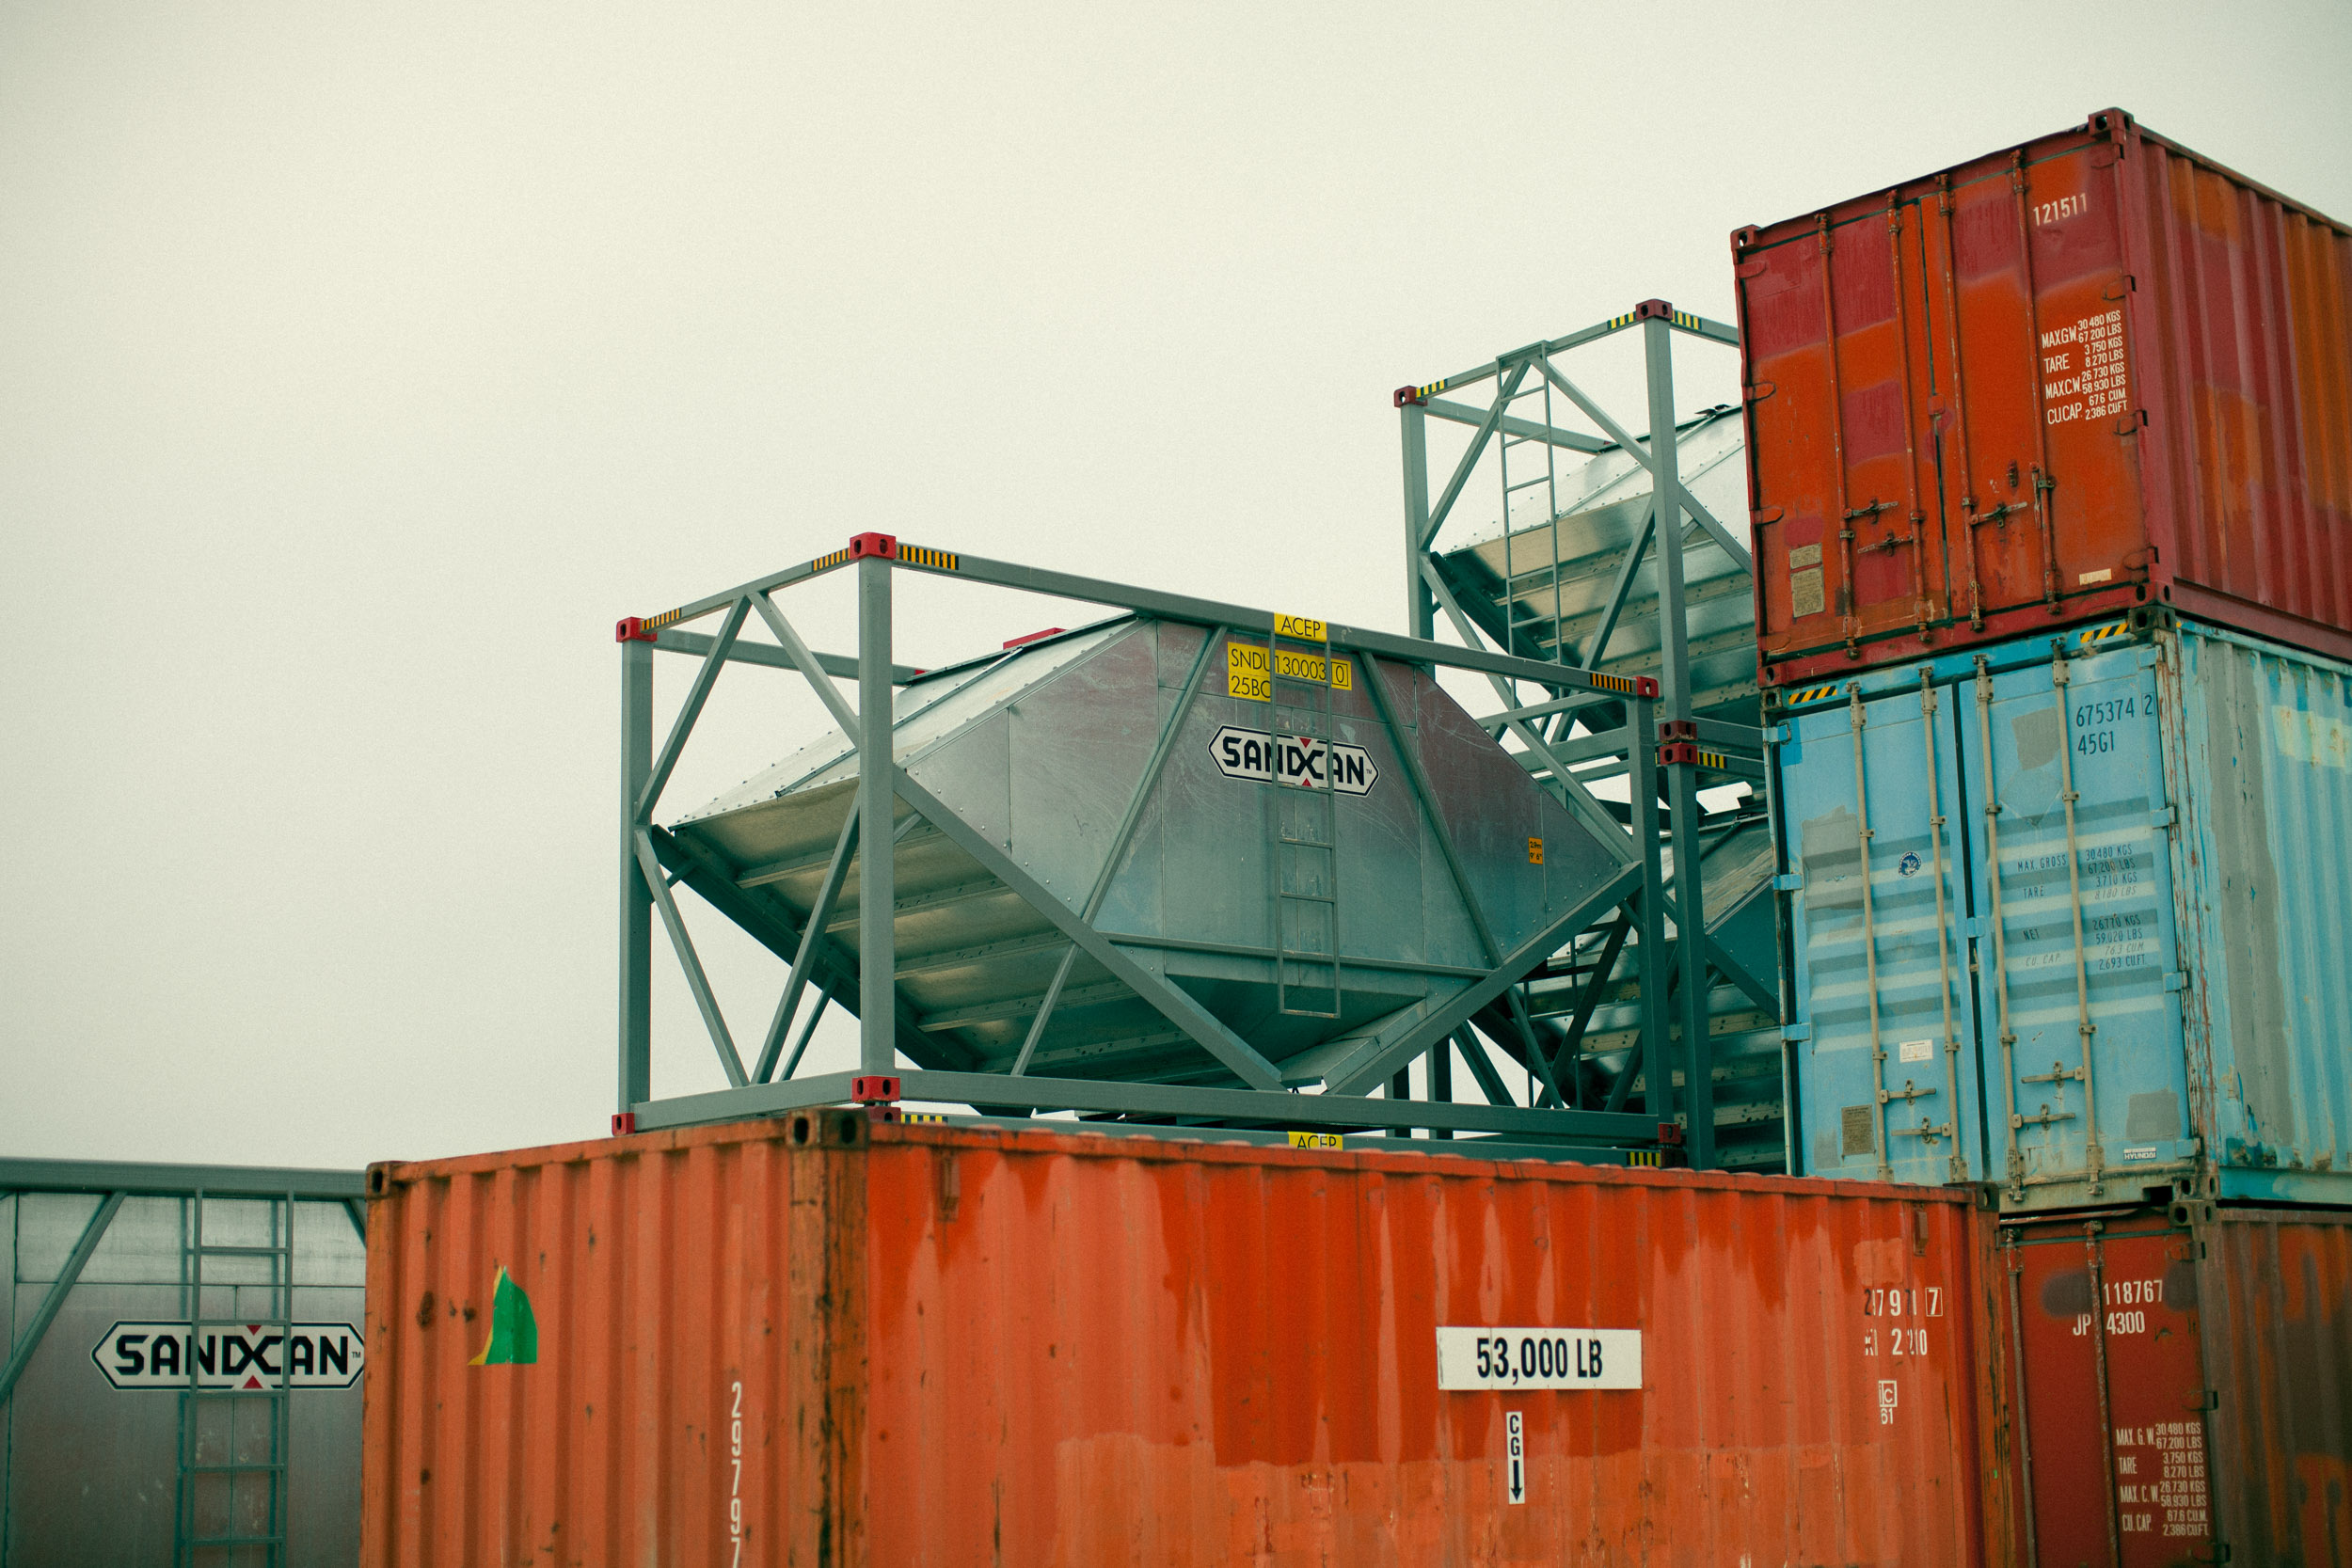 stacks of railroad containers and sand can